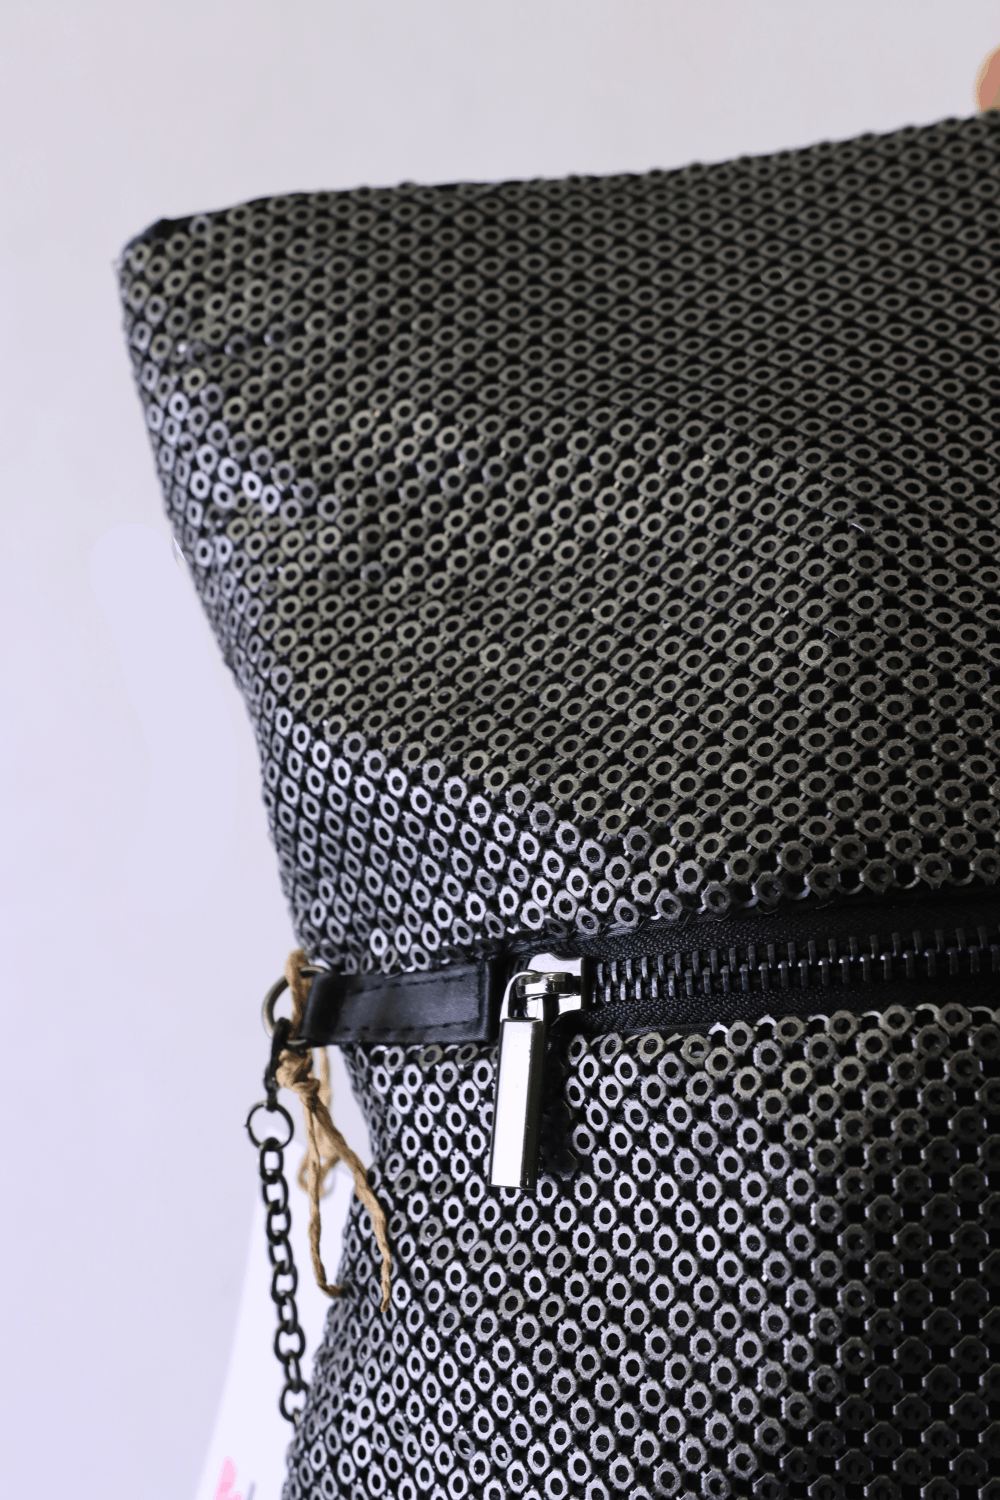 The Line Label Sequin Silver Bag